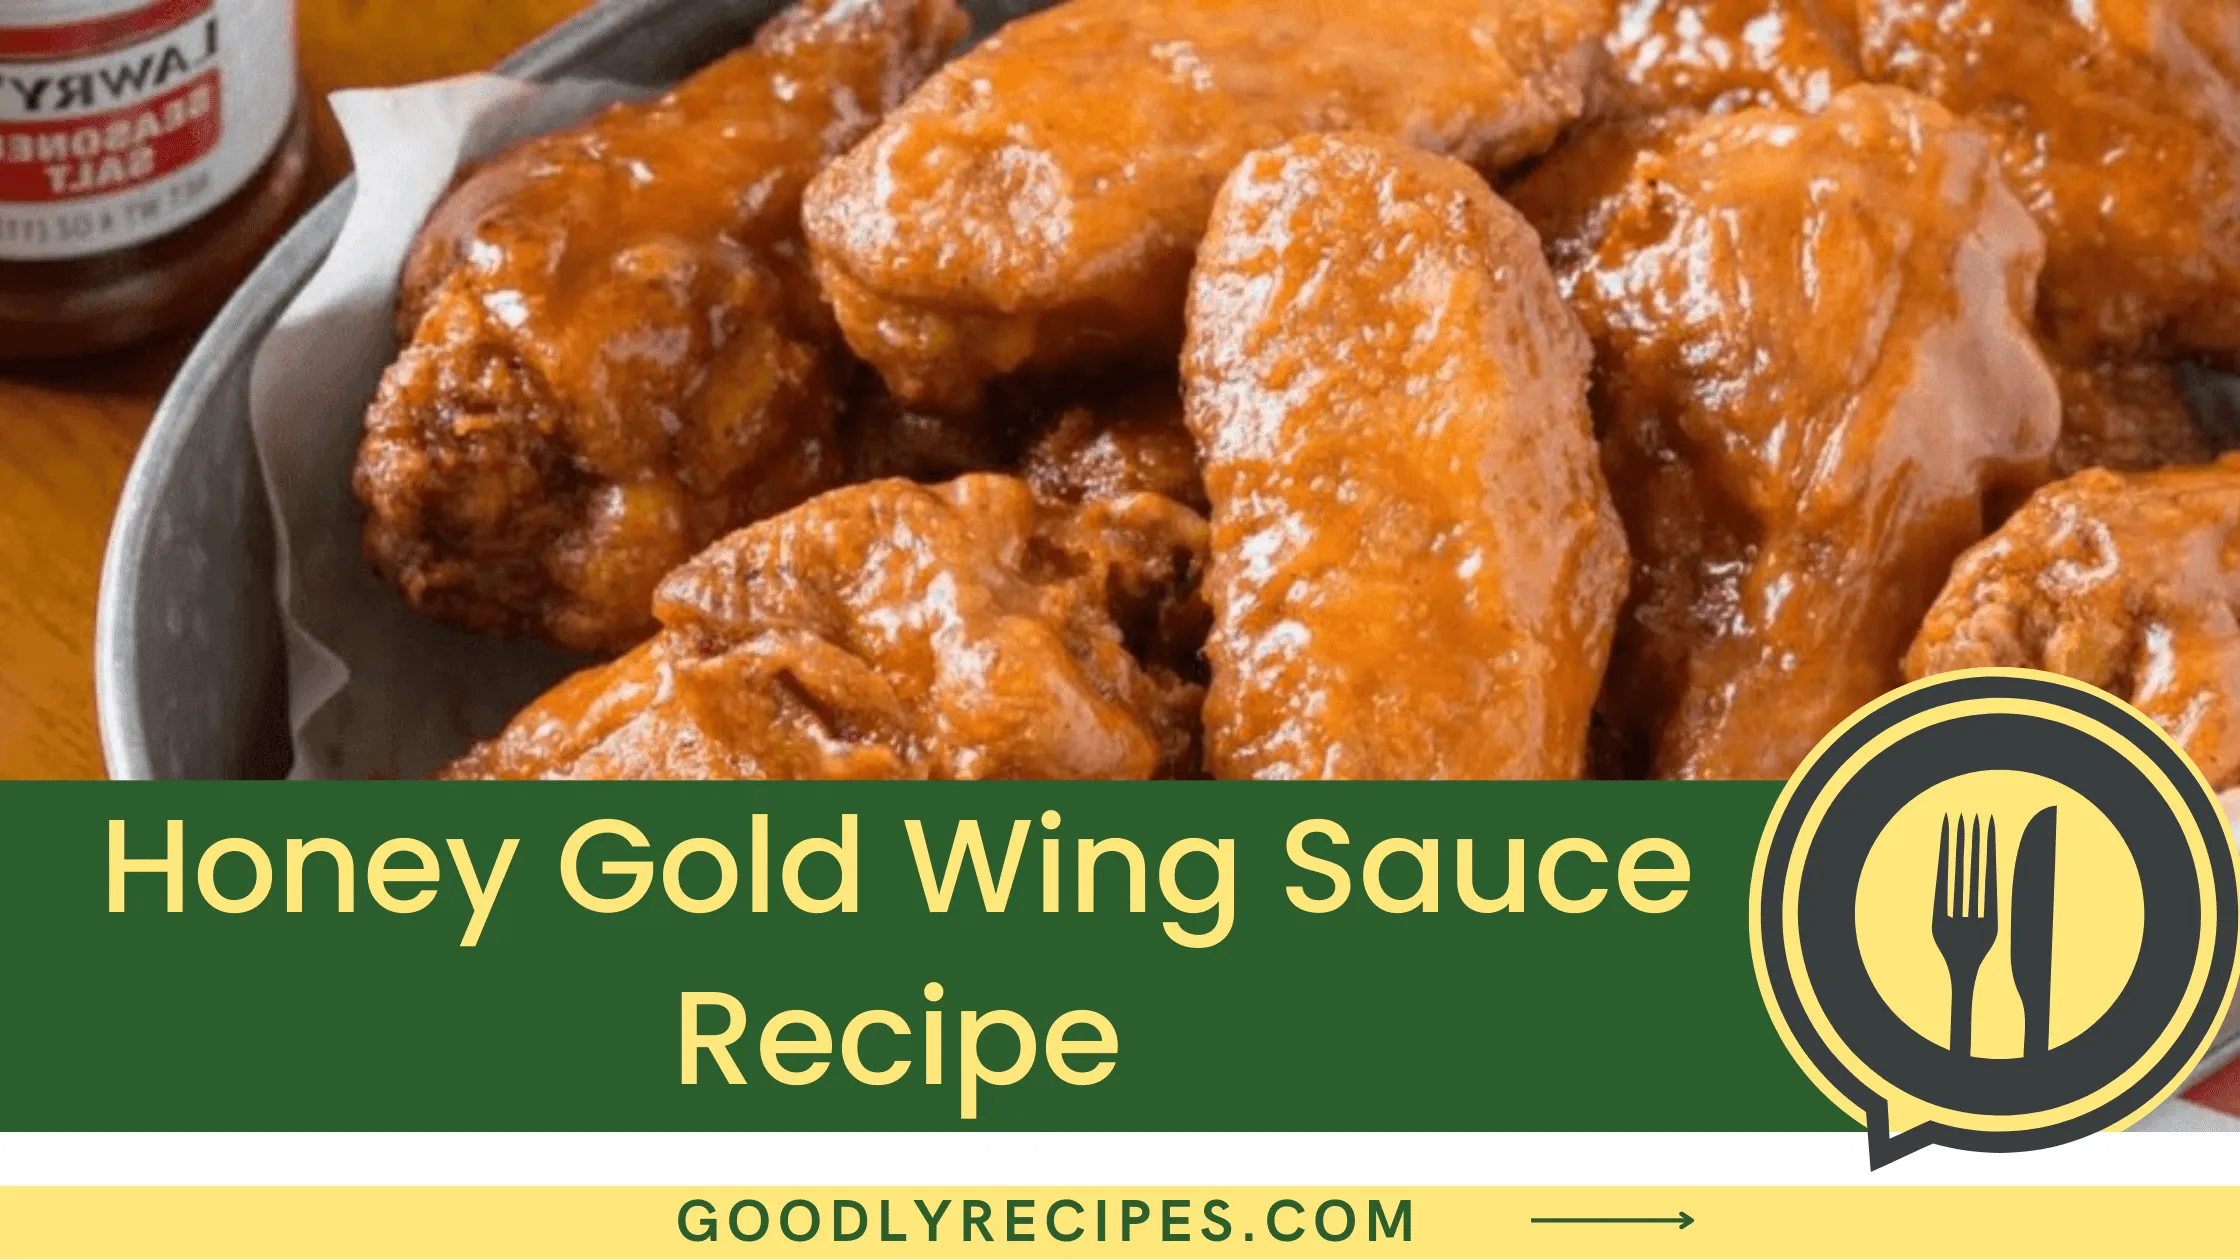 Honey Gold Wing Sauce Recipe - For Food Lovers